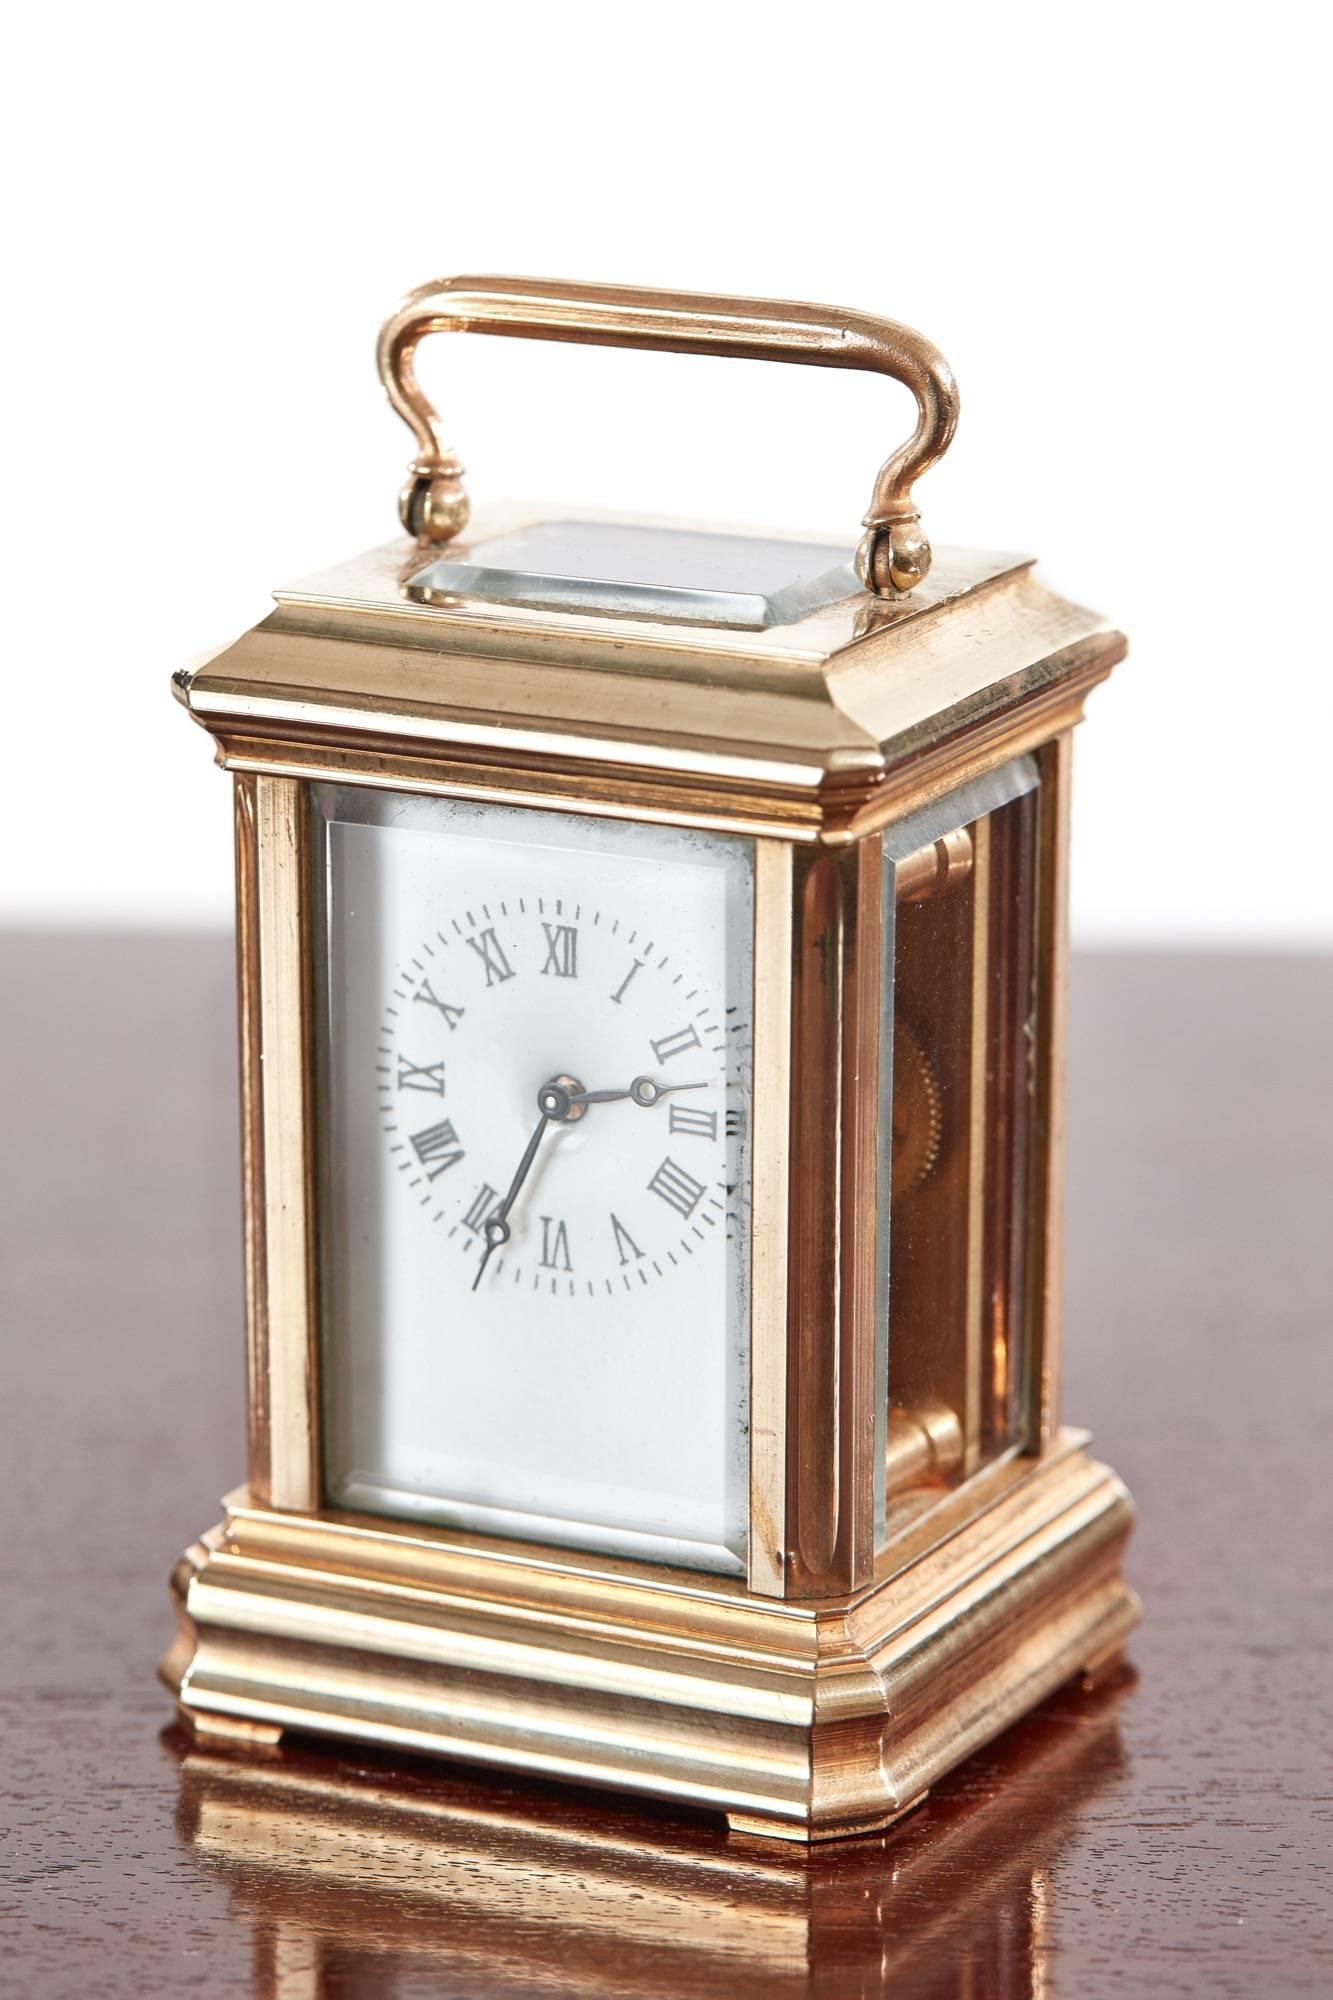 Fine miniature antique French brass carriage clock, with a porcelain dial and bevelled edge glass to each side, in good working order, original key.